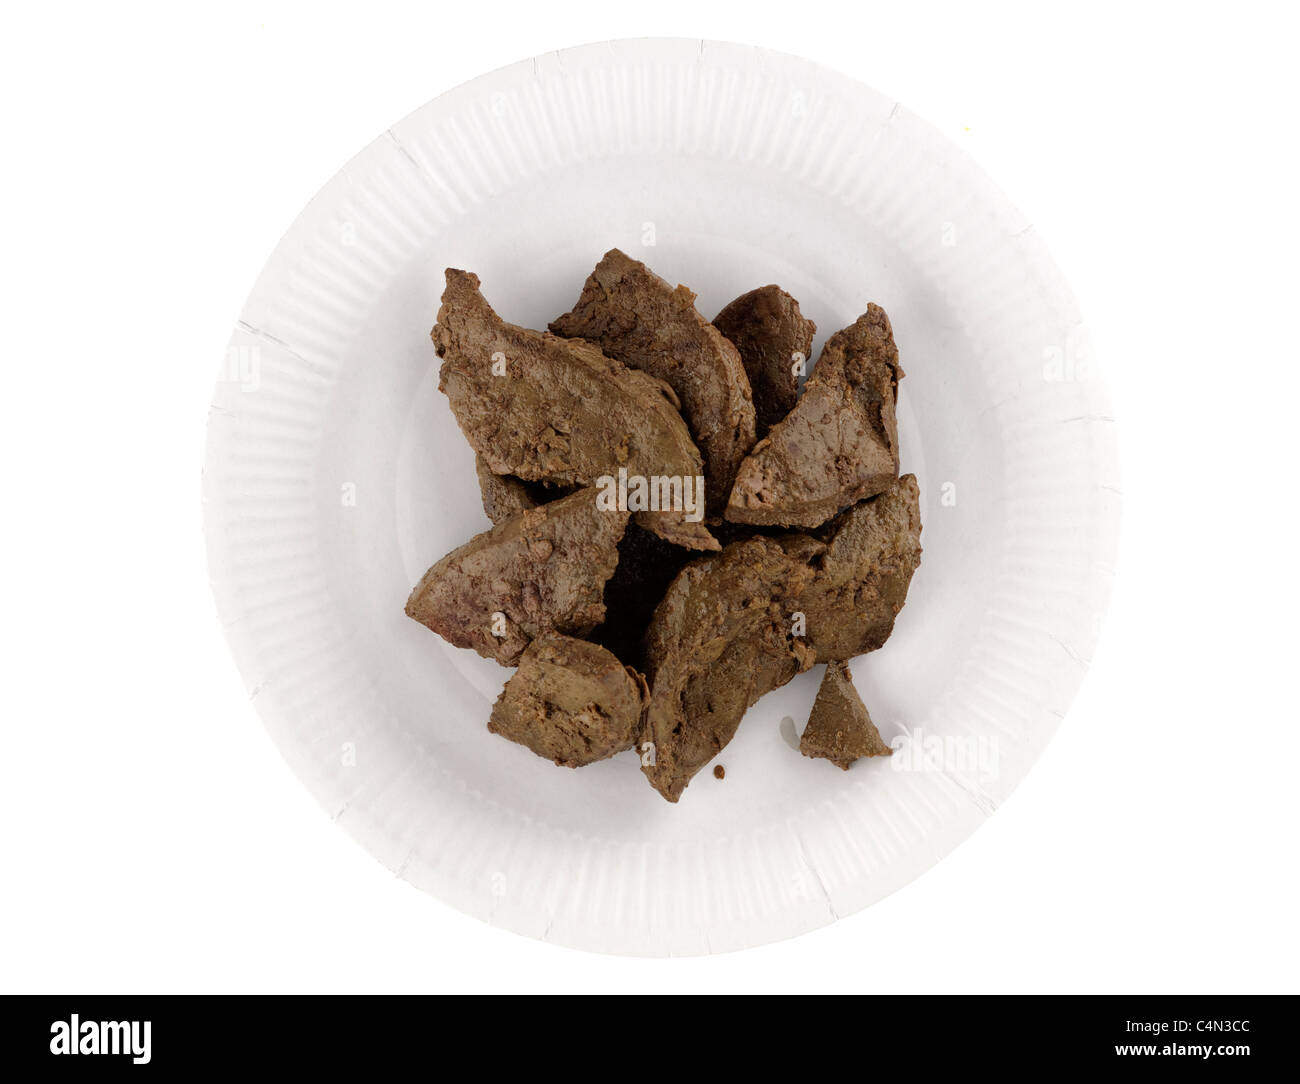 Fried lambs liver on a paper plate Stock Photo